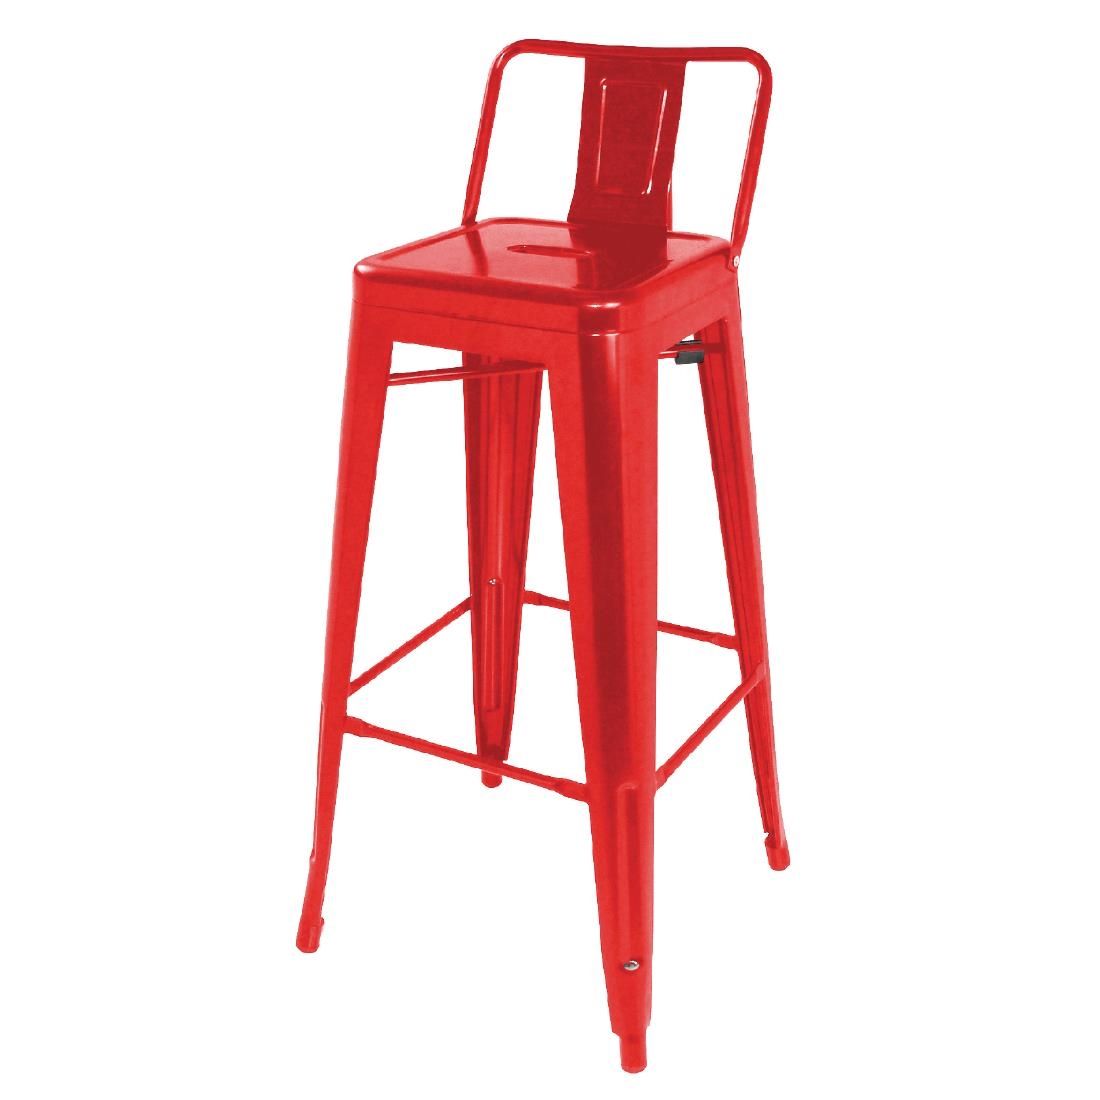 Bolero Bistro Steel High Stool With Backrest Red (Pack of 4) JD Catering Equipment Solutions Ltd